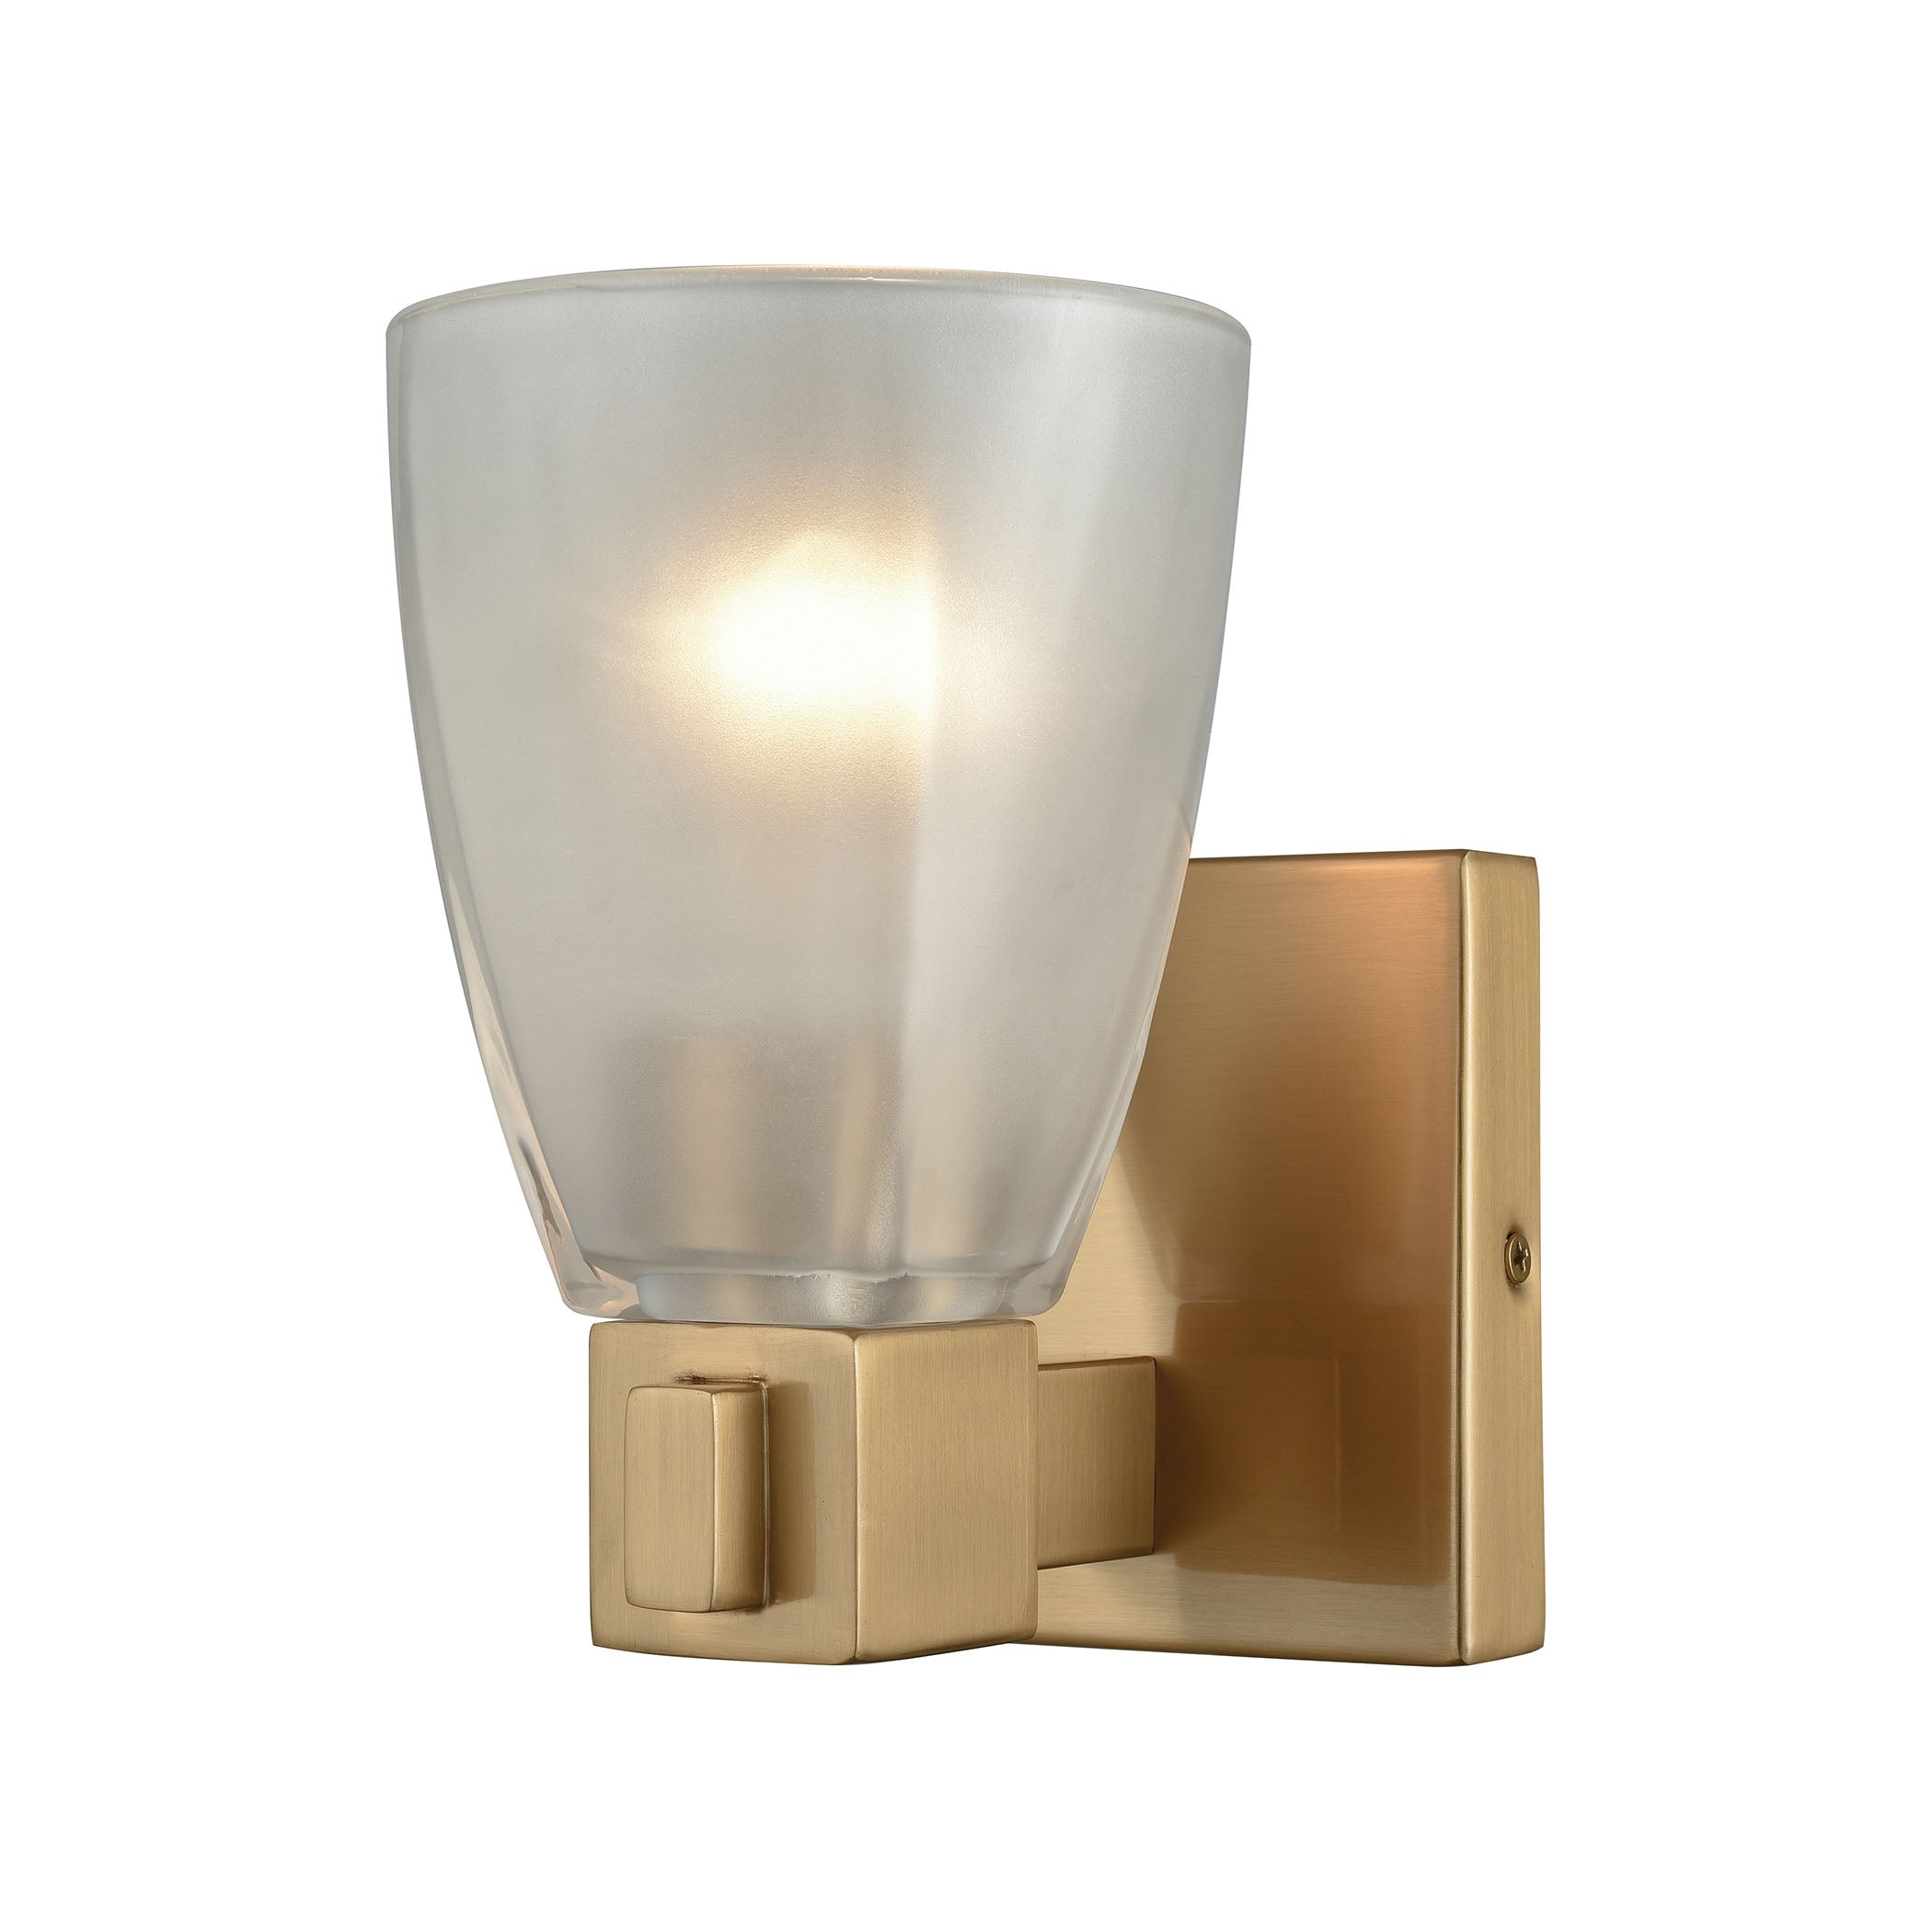 ELK Lighting 11990/1 Ensley 1-Light Vanity Lamp in Satin Brass with Square-to-Round Frosted Glass